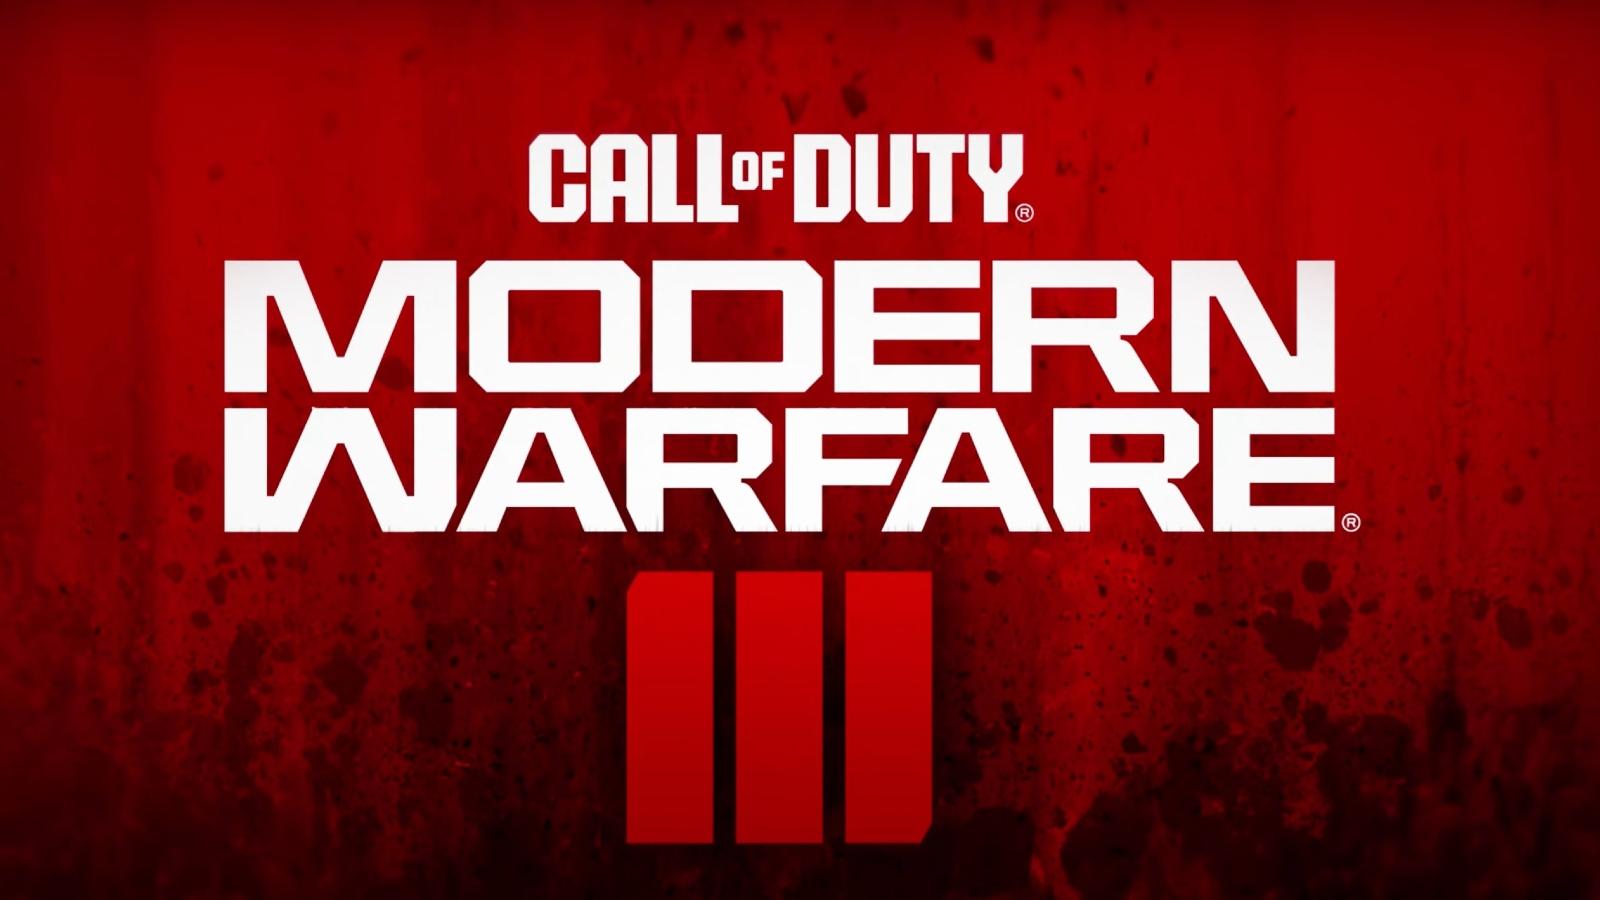 Call of Duty Modern Warfare 3: 'Call of Duty: Modern Warfare 3': See  release date of upcoming game - The Economic Times